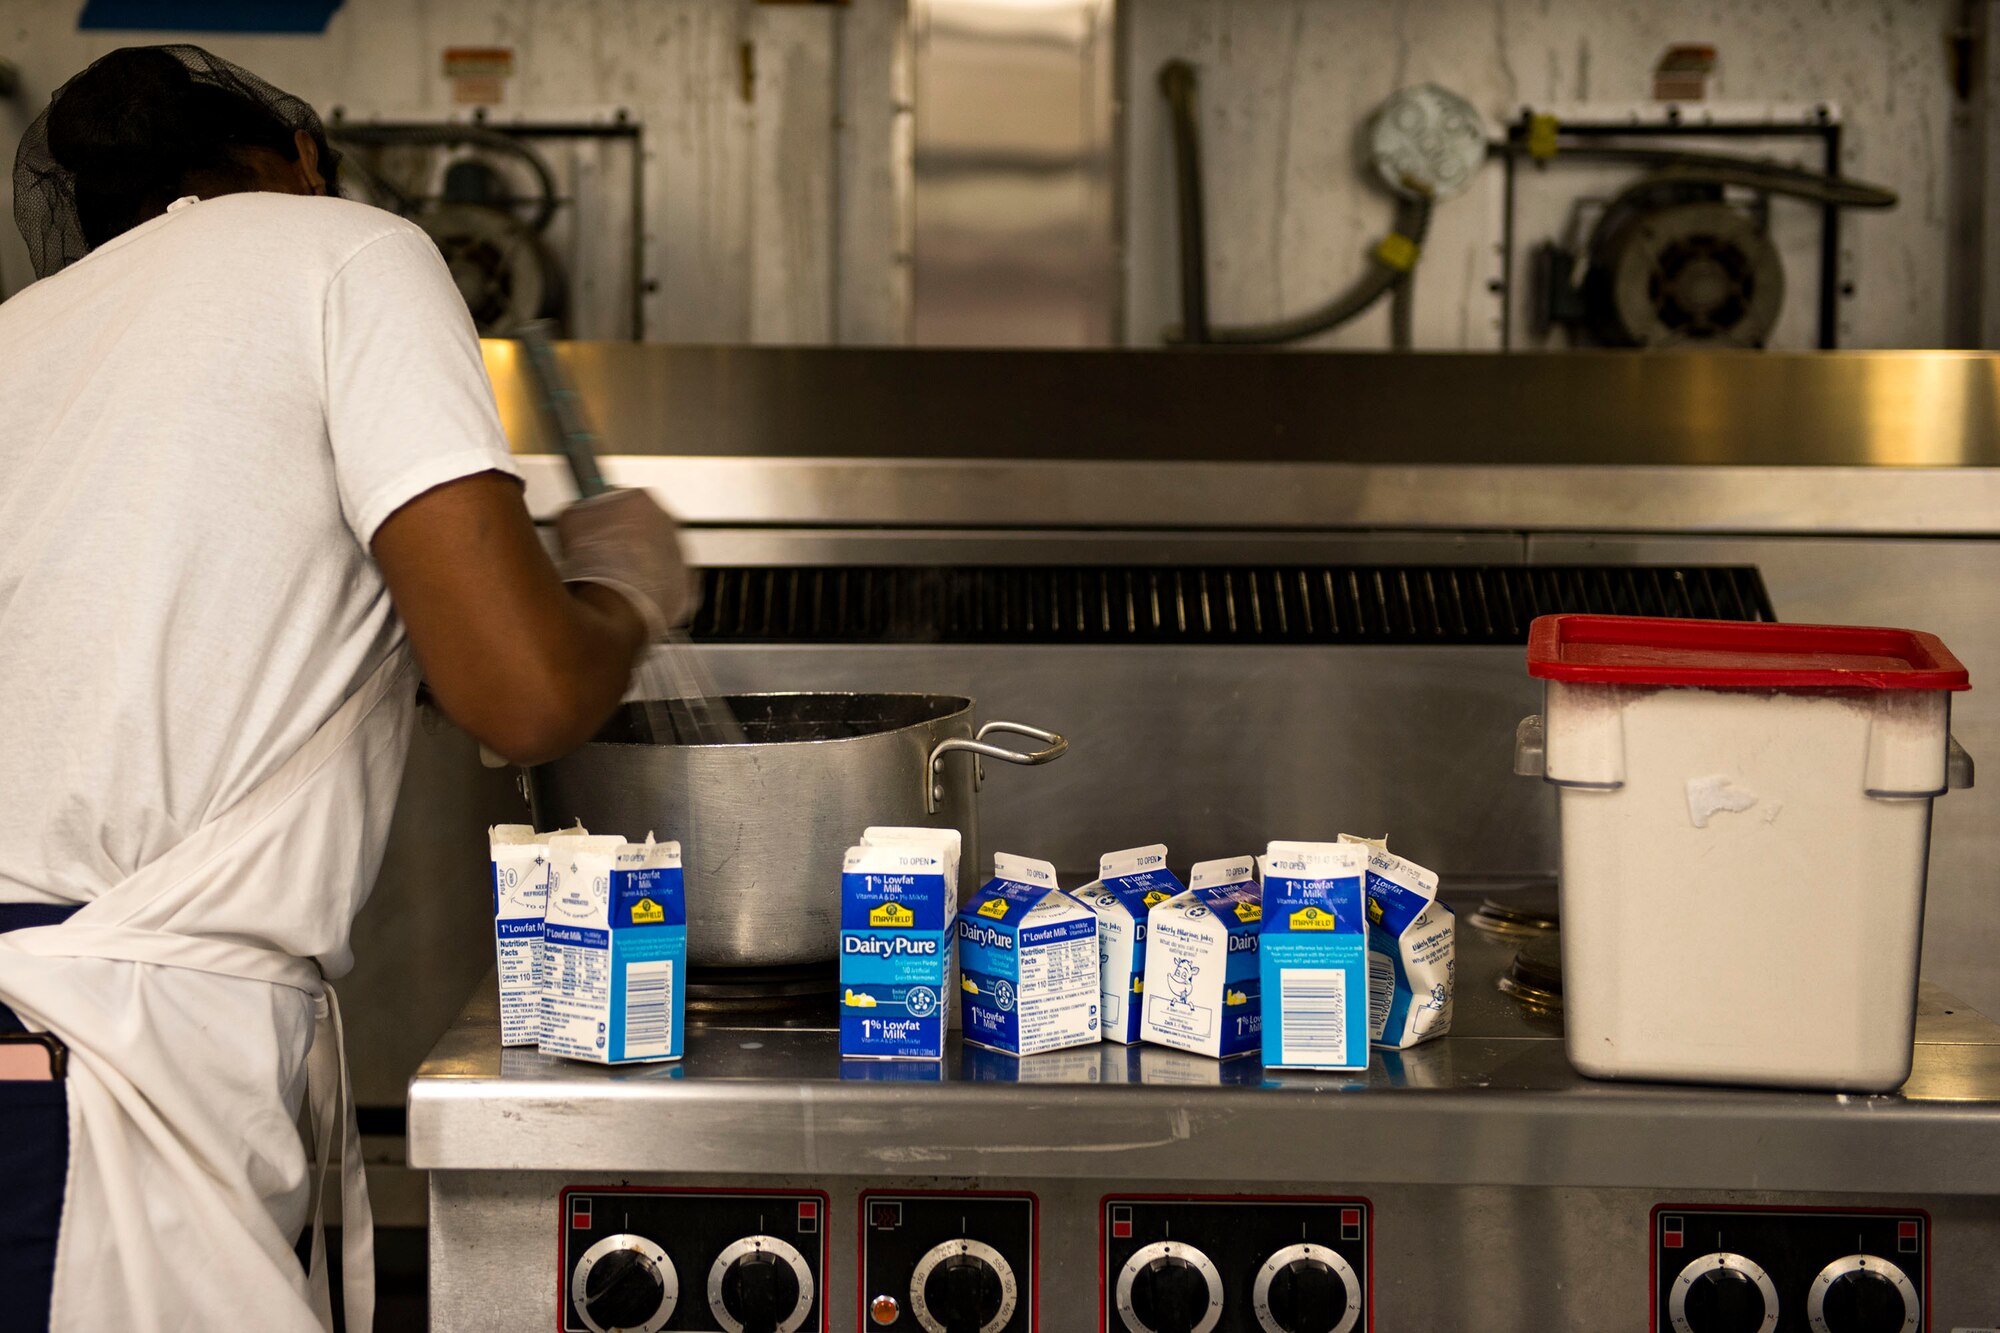 Airman 1st Class Ravin Collins, 23d Force Support Squadron food services journeyman, whisks alfredo sauce in the Georgia Pines Dining Facility (DFAC), Dec. 12, 2017, at Moody Air Force Base, Ga. Through teamwork, adaption and striving for excellence, the Georgia Pines DFAC Airmen are able to ensure Team Moody is fed and ready to finish the fight. (U.S. Air Force Base photo by Airman 1st Class Erick Requadt)